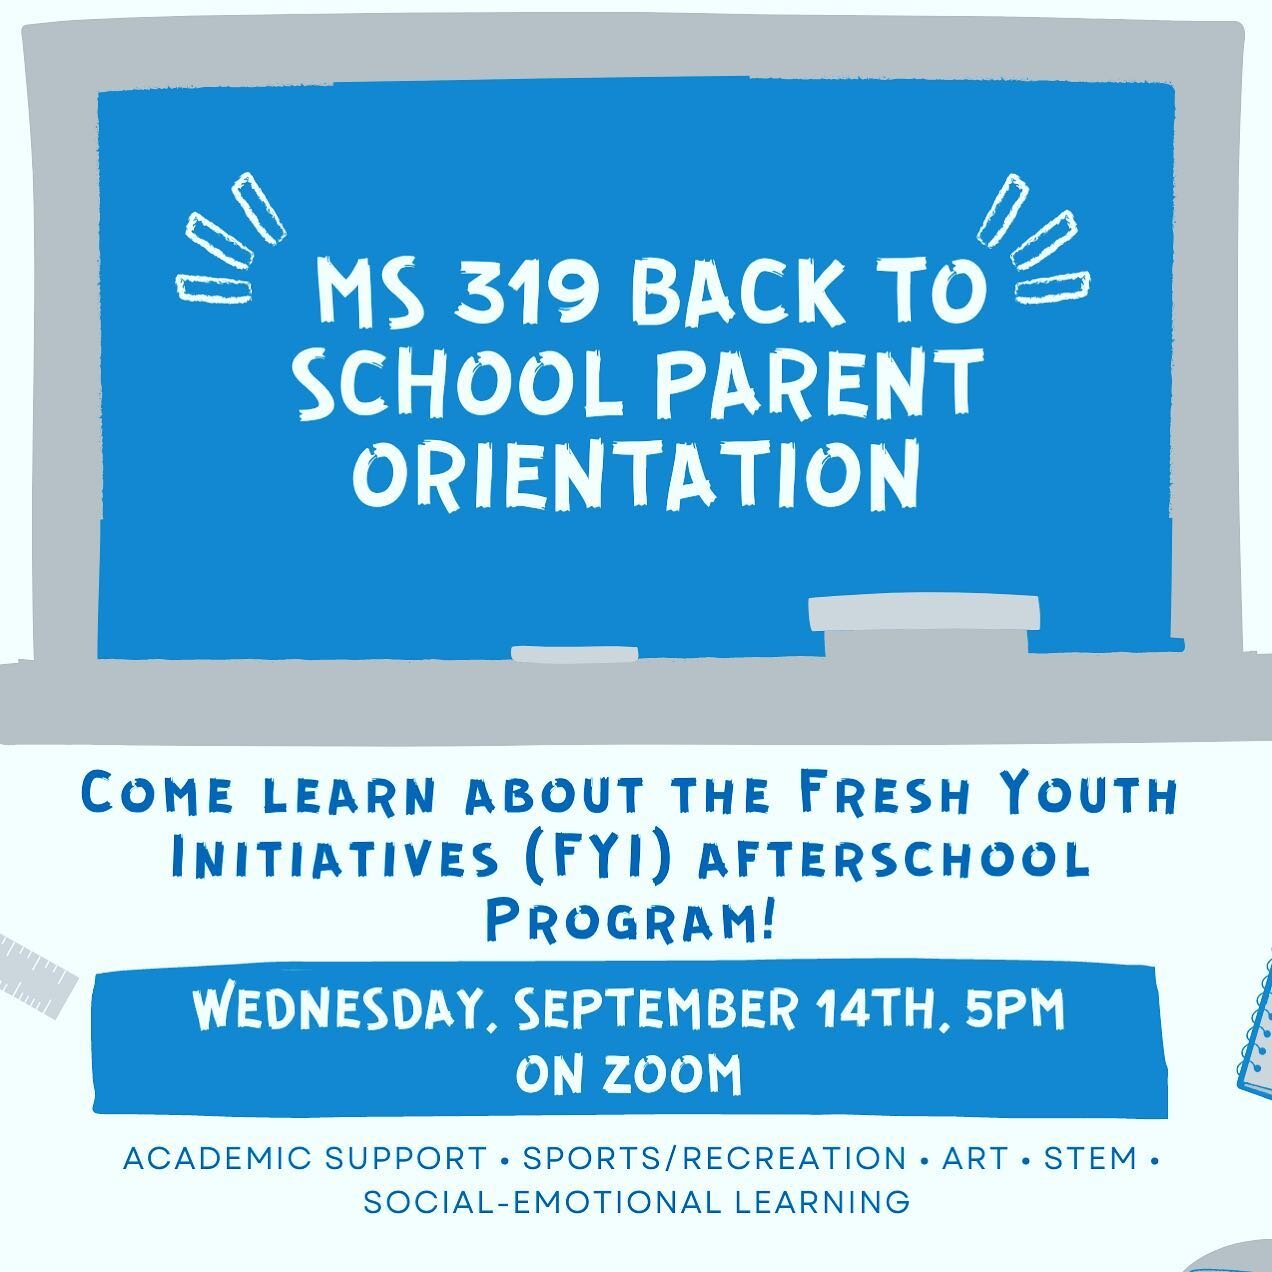 🖐🏼🖐🏽🖐🏾 Calling all kids and parents at MS319, Mar&iacute;a Teresa Mirabal School! 

Parent/Guardian orientation for this year&rsquo;s FYI afterschool program is Wednesday 9/14 at 5PM on ZOOM.

Meet our awesome staff, learn about program goals, 